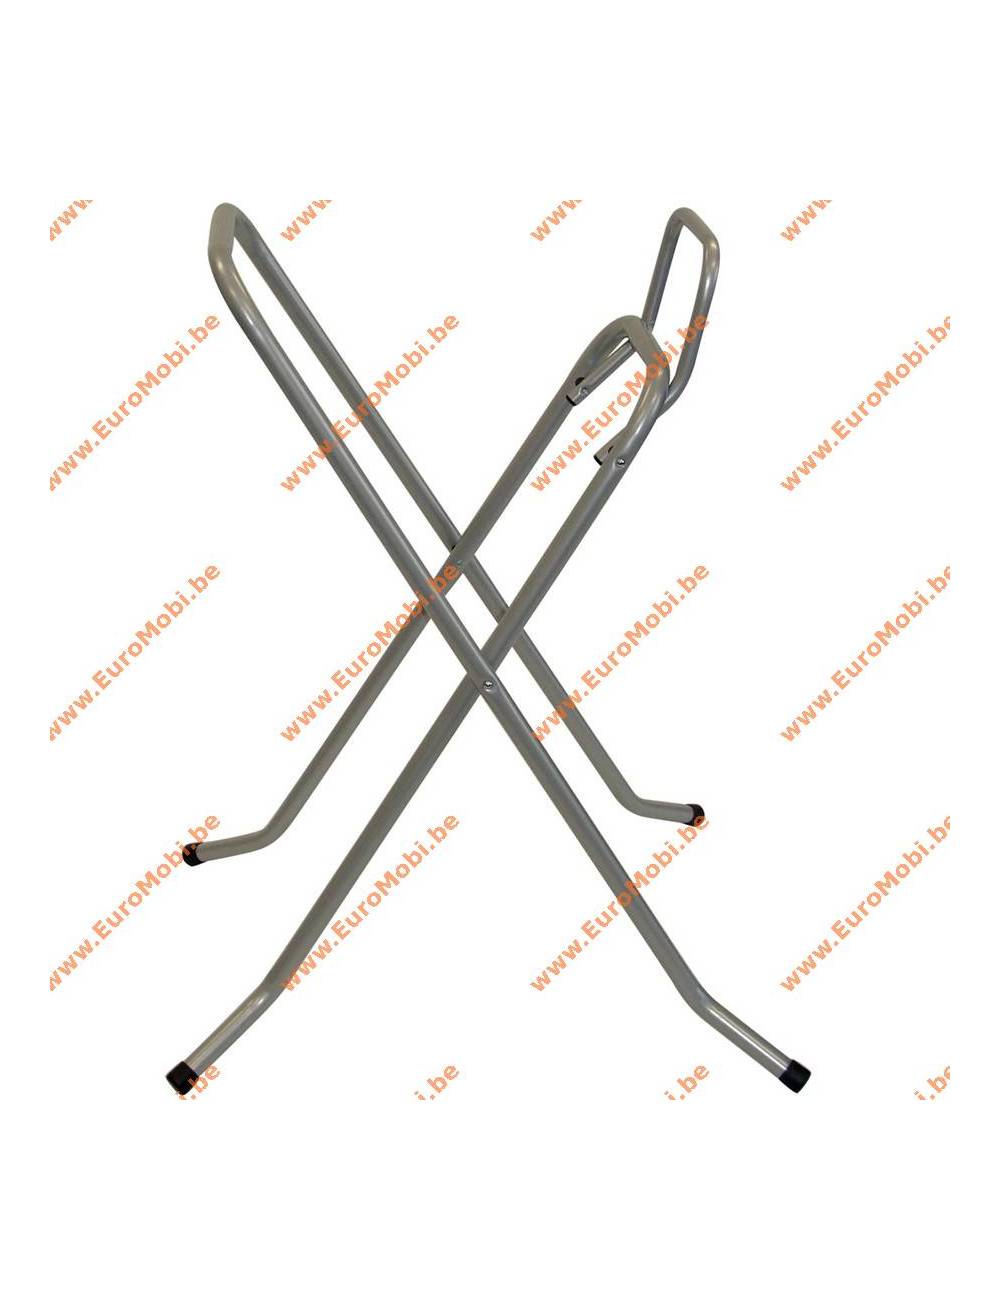 Aluminium color frame for standing table Mater